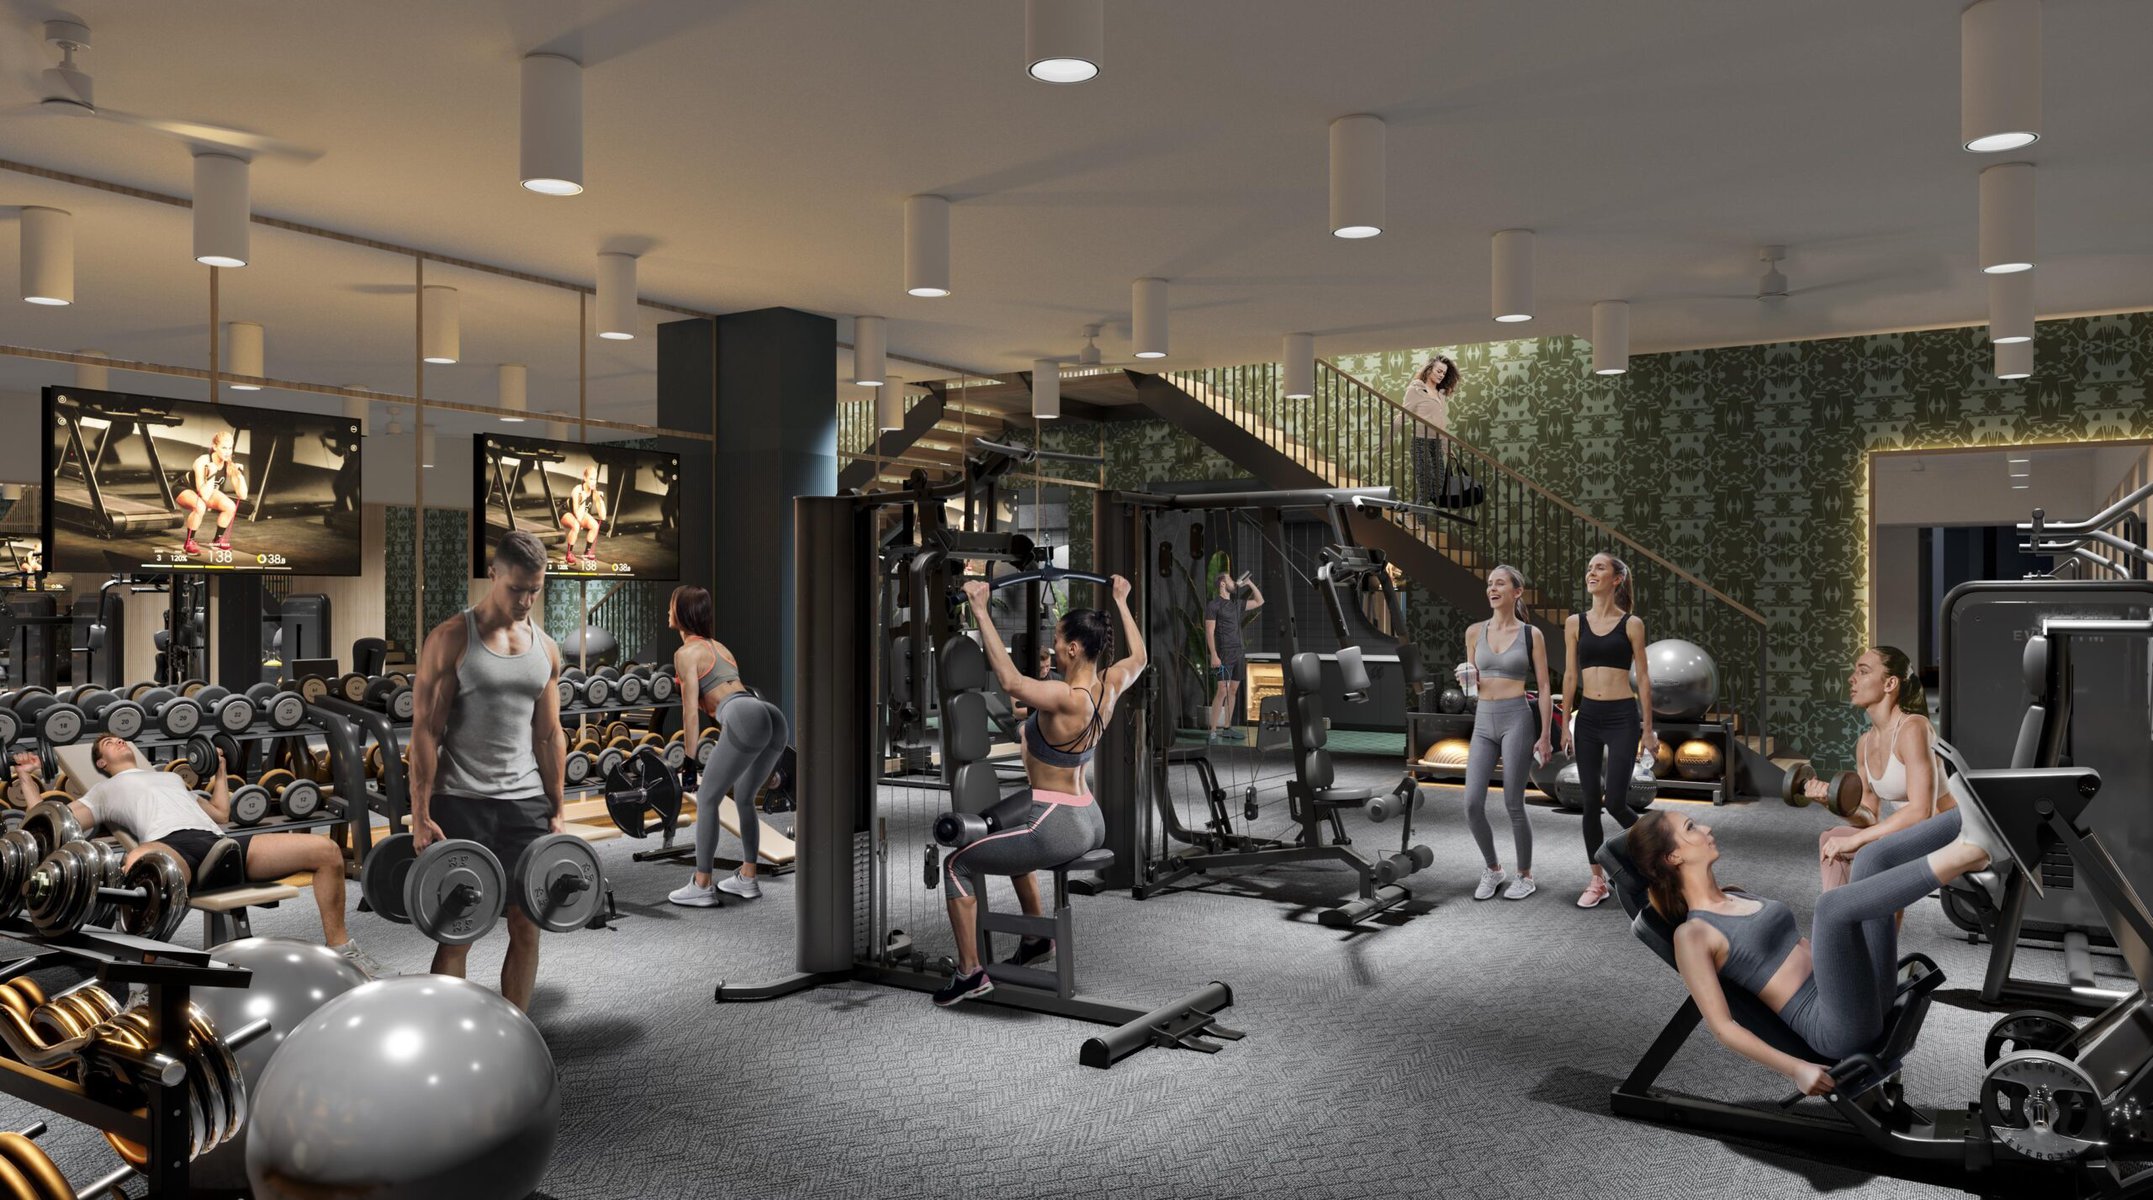 Rendering of people working out in the large fitness space at Rambler Austin.